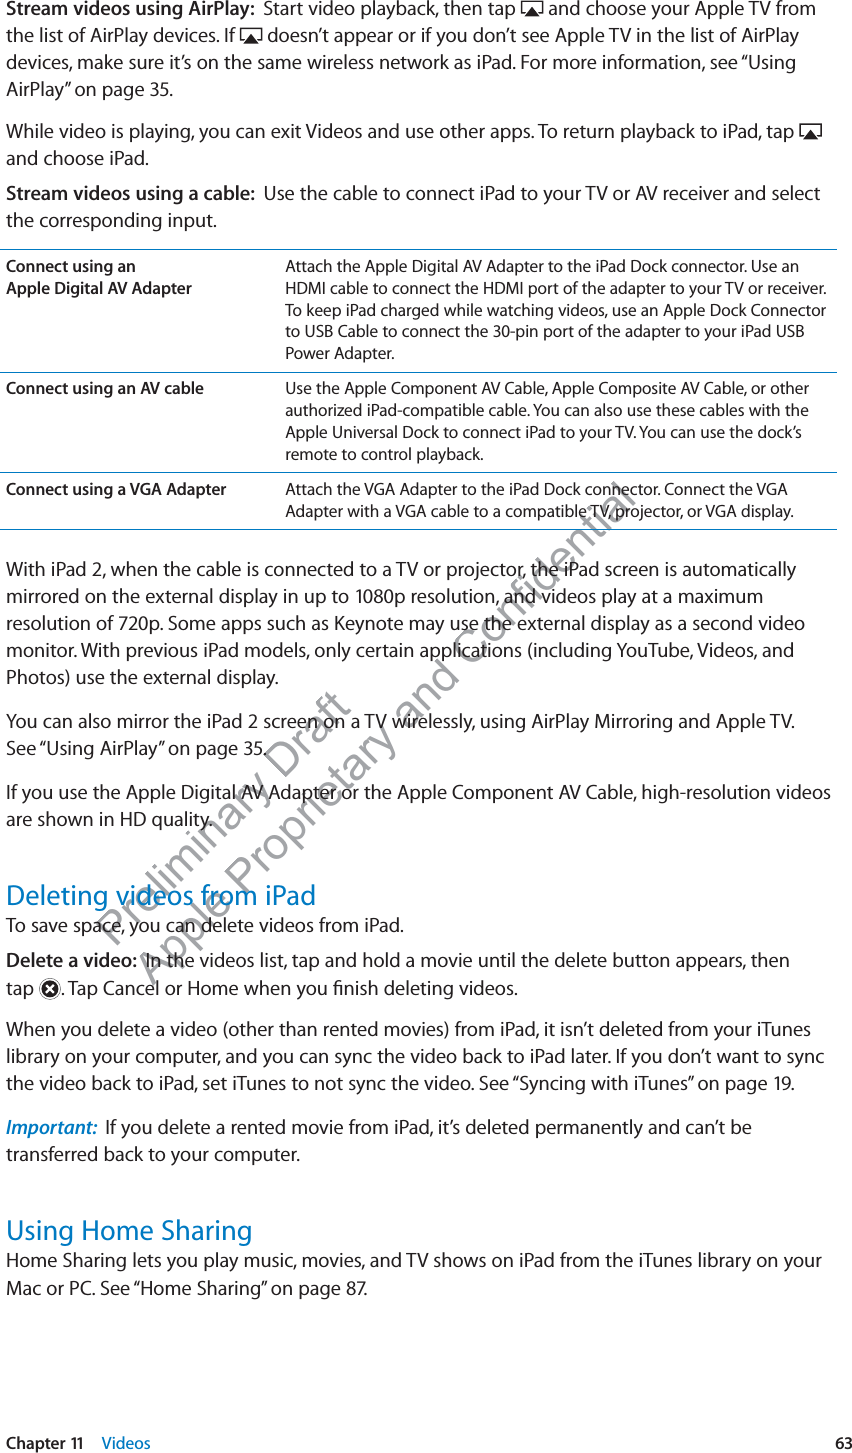 Preliminary Draft Apple Proprietary and Confidential Stream videos using AirPlay:  Start video playback, then tap   and choose your Apple TV from the list of AirPlay devices. If   doesn’t appear or if you don’t see Apple TV in the list of AirPlay devices, make sure it’s on the same wireless network as iPad. For more information, see “Using AirPlay” on page 35.While video is playing, you can exit Videos and use other apps. To return playback to iPad, tap   and choose iPad.Stream videos using a cable:  Use the cable to connect iPad to your TV or AV receiver and select the corresponding input.Connect using an  Apple Digital AV AdapterAttach the Apple Digital AV Adapter to the iPad Dock connector. Use an HDMI cable to connect the HDMI port of the adapter to your TV or receiver. To keep iPad charged while watching videos, use an Apple Dock Connector to USB Cable to connect the 30-pin port of the adapter to your iPad USB Power Adapter.Connect using an AV cable Use the Apple Component AV Cable, Apple Composite AV Cable, or other authorized iPad-compatible cable. You can also use these cables with the Apple Universal Dock to connect iPad to your TV. You can use the dock’s remote to control playback. Connect using a VGA Adapter Attach the VGA Adapter to the iPad Dock connector. Connect the VGA Adapter with a VGA cable to a compatible TV, projector, or VGA display.With iPad 2, when the cable is connected to a TV or projector, the iPad screen is automatically mirrored on the external display in up to 1080p resolution, and videos play at a maximum resolution of 720p. Some apps such as Keynote may use the external display as a second video monitor. With previous iPad models, only certain applications (including YouTube, Videos, and Photos) use the external display.You can also mirror the iPad 2 screen on a TV wirelessly, using AirPlay Mirroring and Apple TV.  See “Using AirPlay” on page 35.If you use the Apple Digital AV Adapter or the Apple Component AV Cable, high-resolution videos are shown in HD quality.Deleting videos from iPadTo save space, you can delete videos from iPad.Delete a video:  In the videos list, tap and hold a movie until the delete button appears, then  tap  . Tap Cancel or Home when you ﬁnish deleting videos.When you delete a video (other than rented movies) from iPad, it isn’t deleted from your iTunes library on your computer, and you can sync the video back to iPad later. If you don’t want to sync the video back to iPad, set iTunes to not sync the video. See “Syncing with iTunes” on page 19.Important:  If you delete a rented movie from iPad, it’s deleted permanently and can’t be transferred back to your computer.Using Home SharingHome Sharing lets you play music, movies, and TV shows on iPad from the iTunes library on your Mac or PC. See “Home Sharing” on page 87.63Chapter 11    Videos